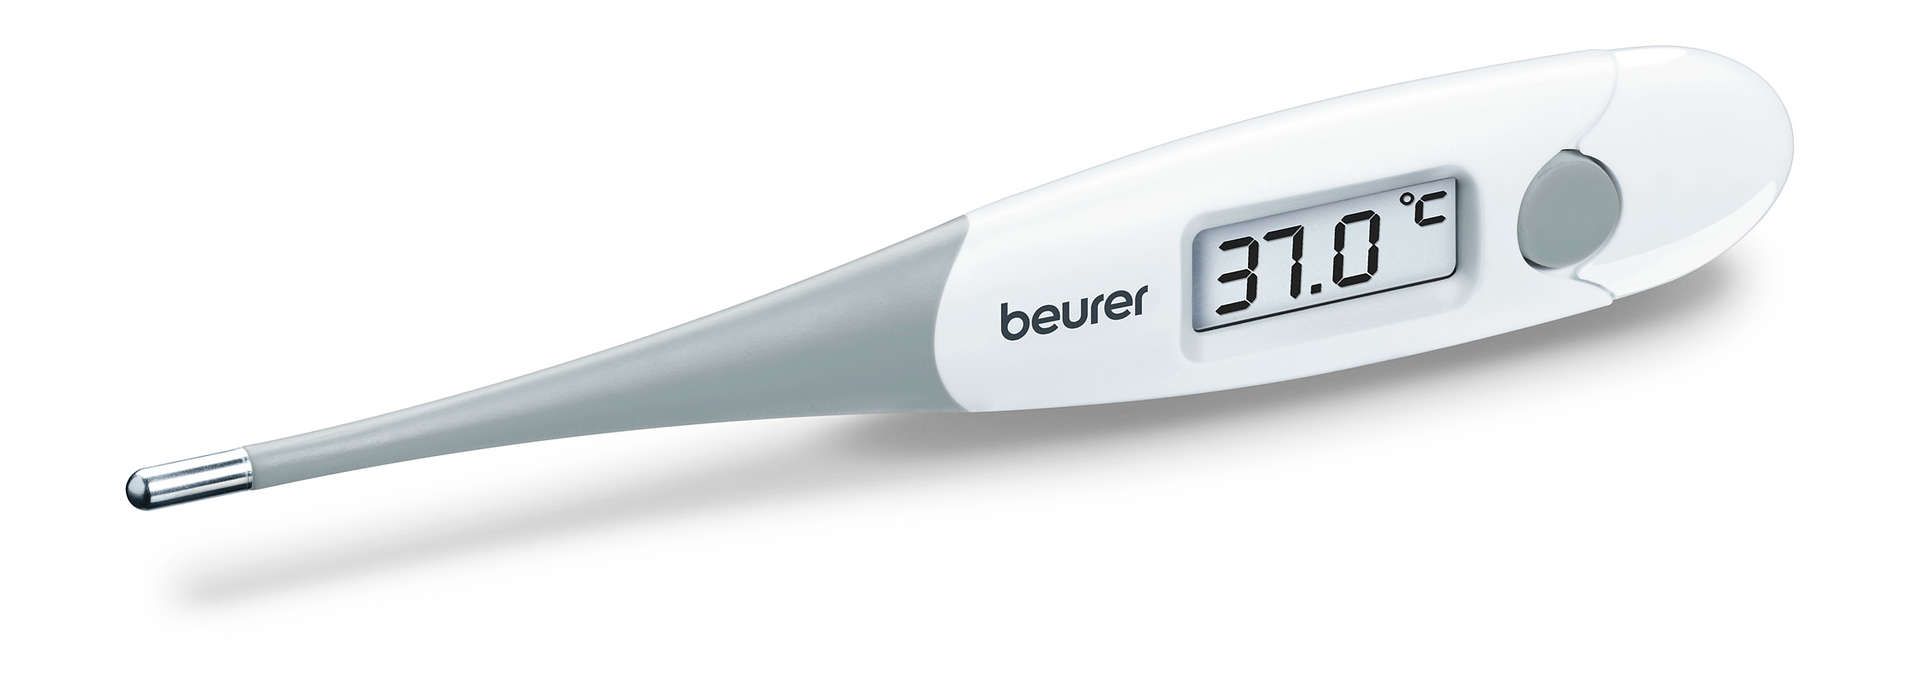 BEURER THERMOMETRE FT15